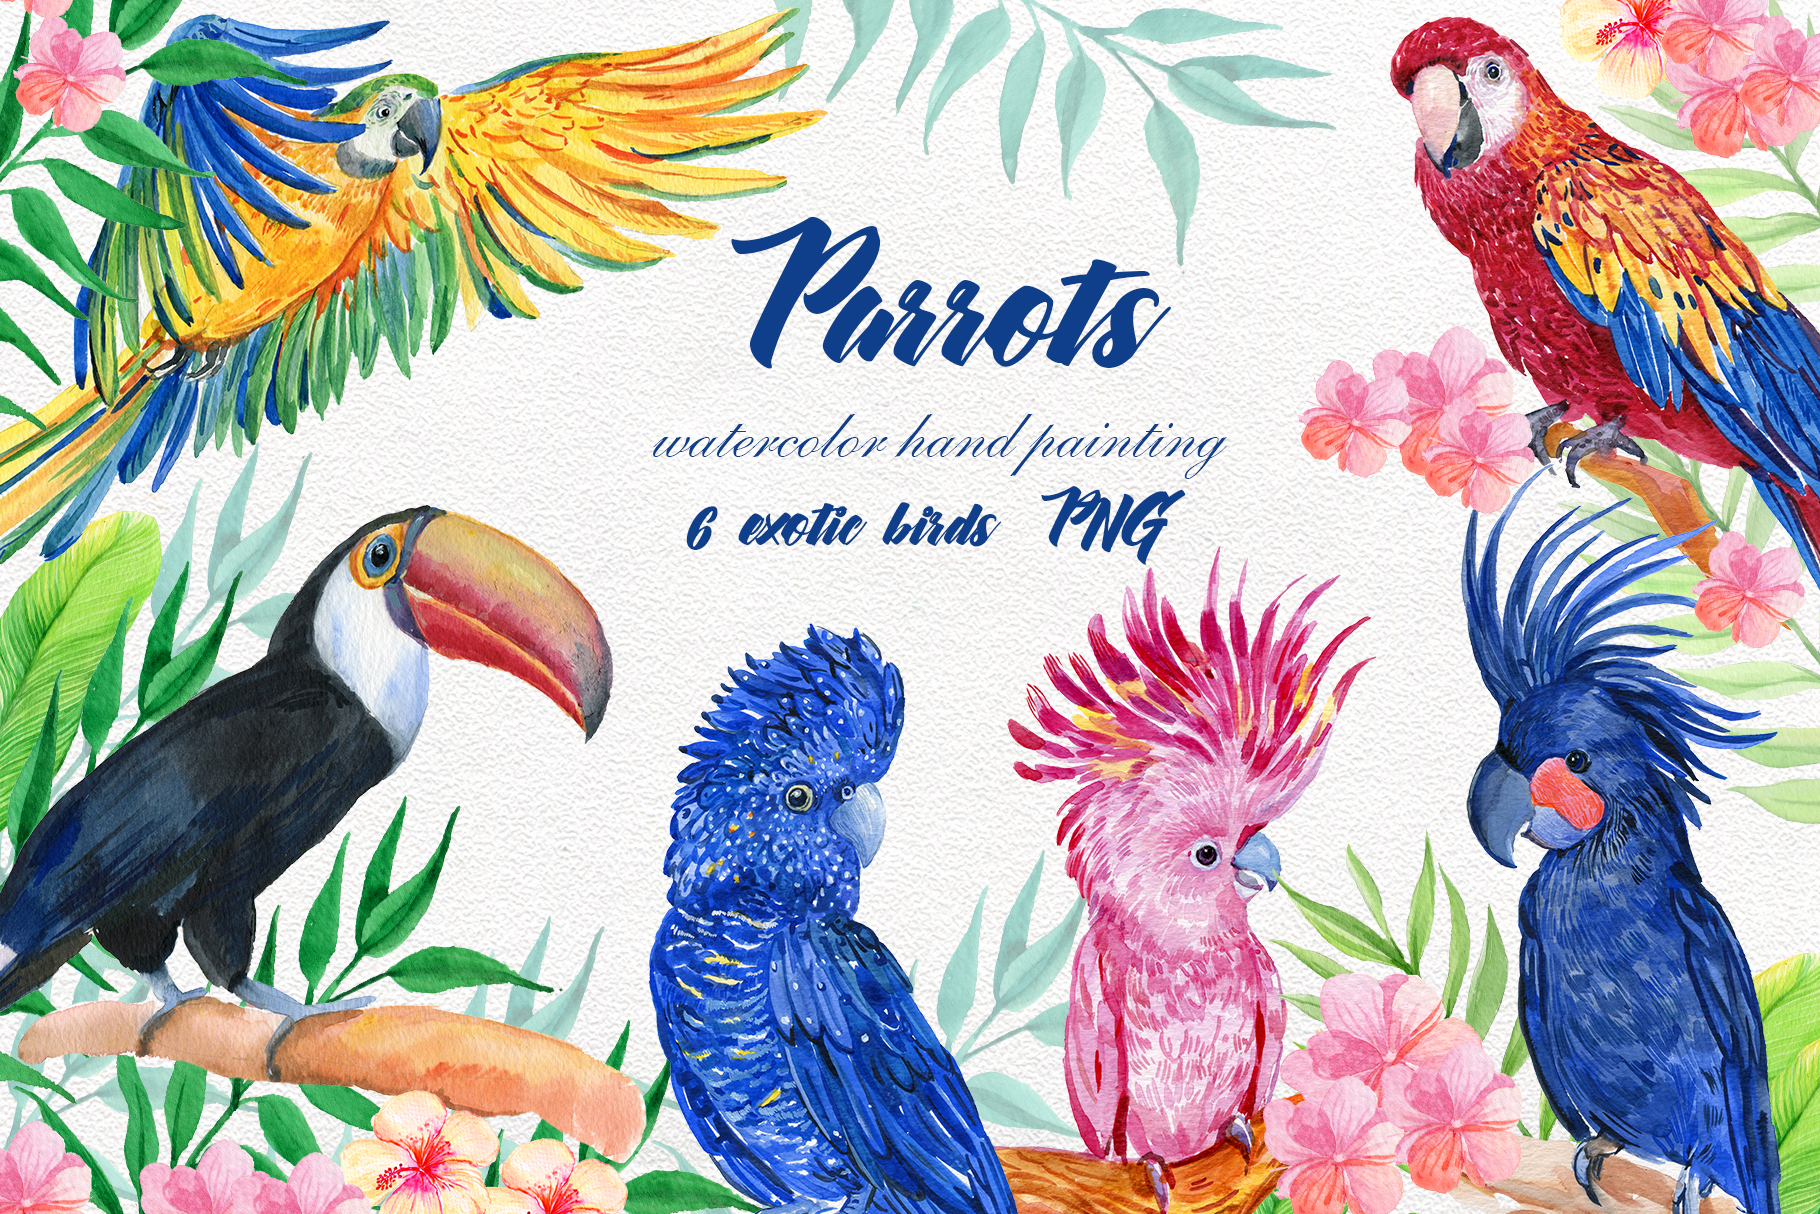 parrot clipart one